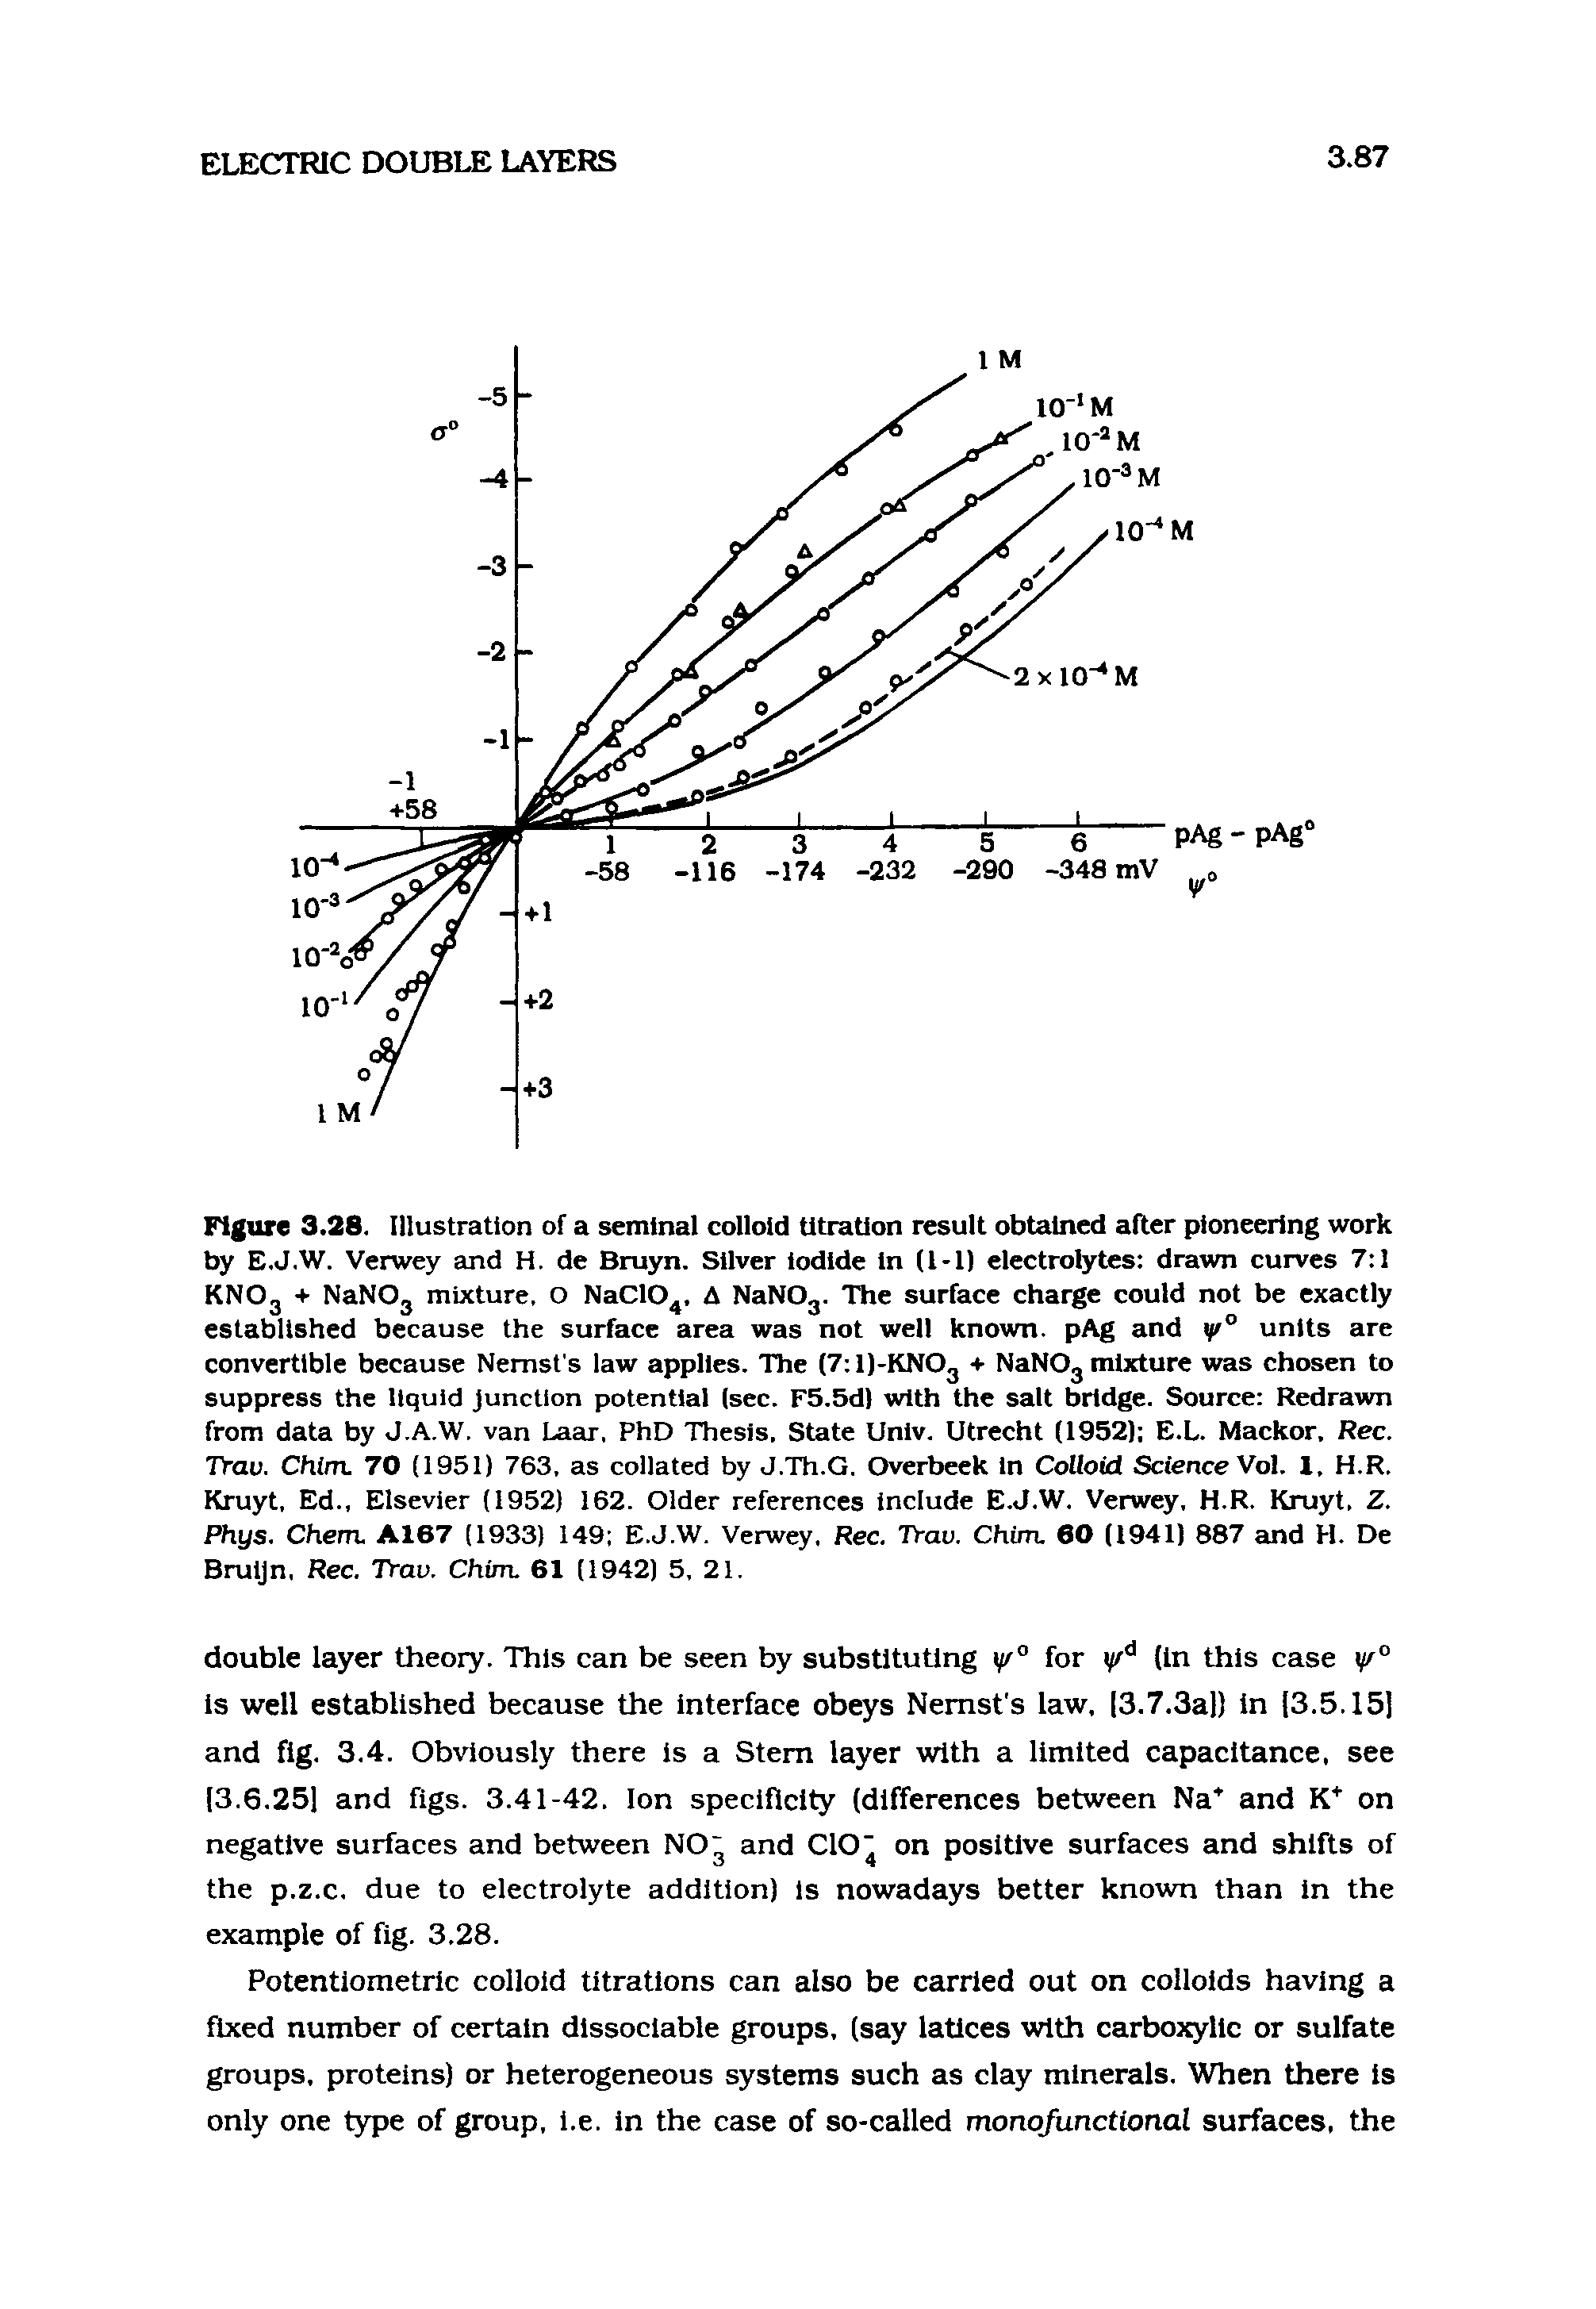 Figure 3.28. Illustration of a seminal colloid titration result obtained after pioneering work by E.J.W. Verwey and H. de Bruyn. Silver iodide in (l-l) electrolytes drawn curves 7 1 KNOg + NaNOg mixture, O NaClO, A NaNOg. The surface charge could not be exactly established because the surface area was not well known. pAg and units are convertible because Nemst s law applies. The (7 l)-KNOg + NaNOg mixture was chosen to suppress the liquid Junction potential (sec. F5.5d) with the salt bridge. Source Redrawn from data by J.A.W, van Laar, PhD Thesis. State Unlv. Utrecht (1952) E.L. Mackor. Rec. Trau. Chim. 70 (1951) 763, as collated by J.Th.G. Overbeek In Colloid Science Vol. 1, H.R. Kruyt, Ed., Elsevier (1952) 162. Older references include E.J.W. Verwey, H.R. Kruyt, Z. Phys. Chem. A167 (1933) 149 E.J.W. Verwey. Rec. Trav. Chim. 60 (1941) 887 and H. De Bruljn. Rec. Trav. Chim. 61 (1942) 5, 21.